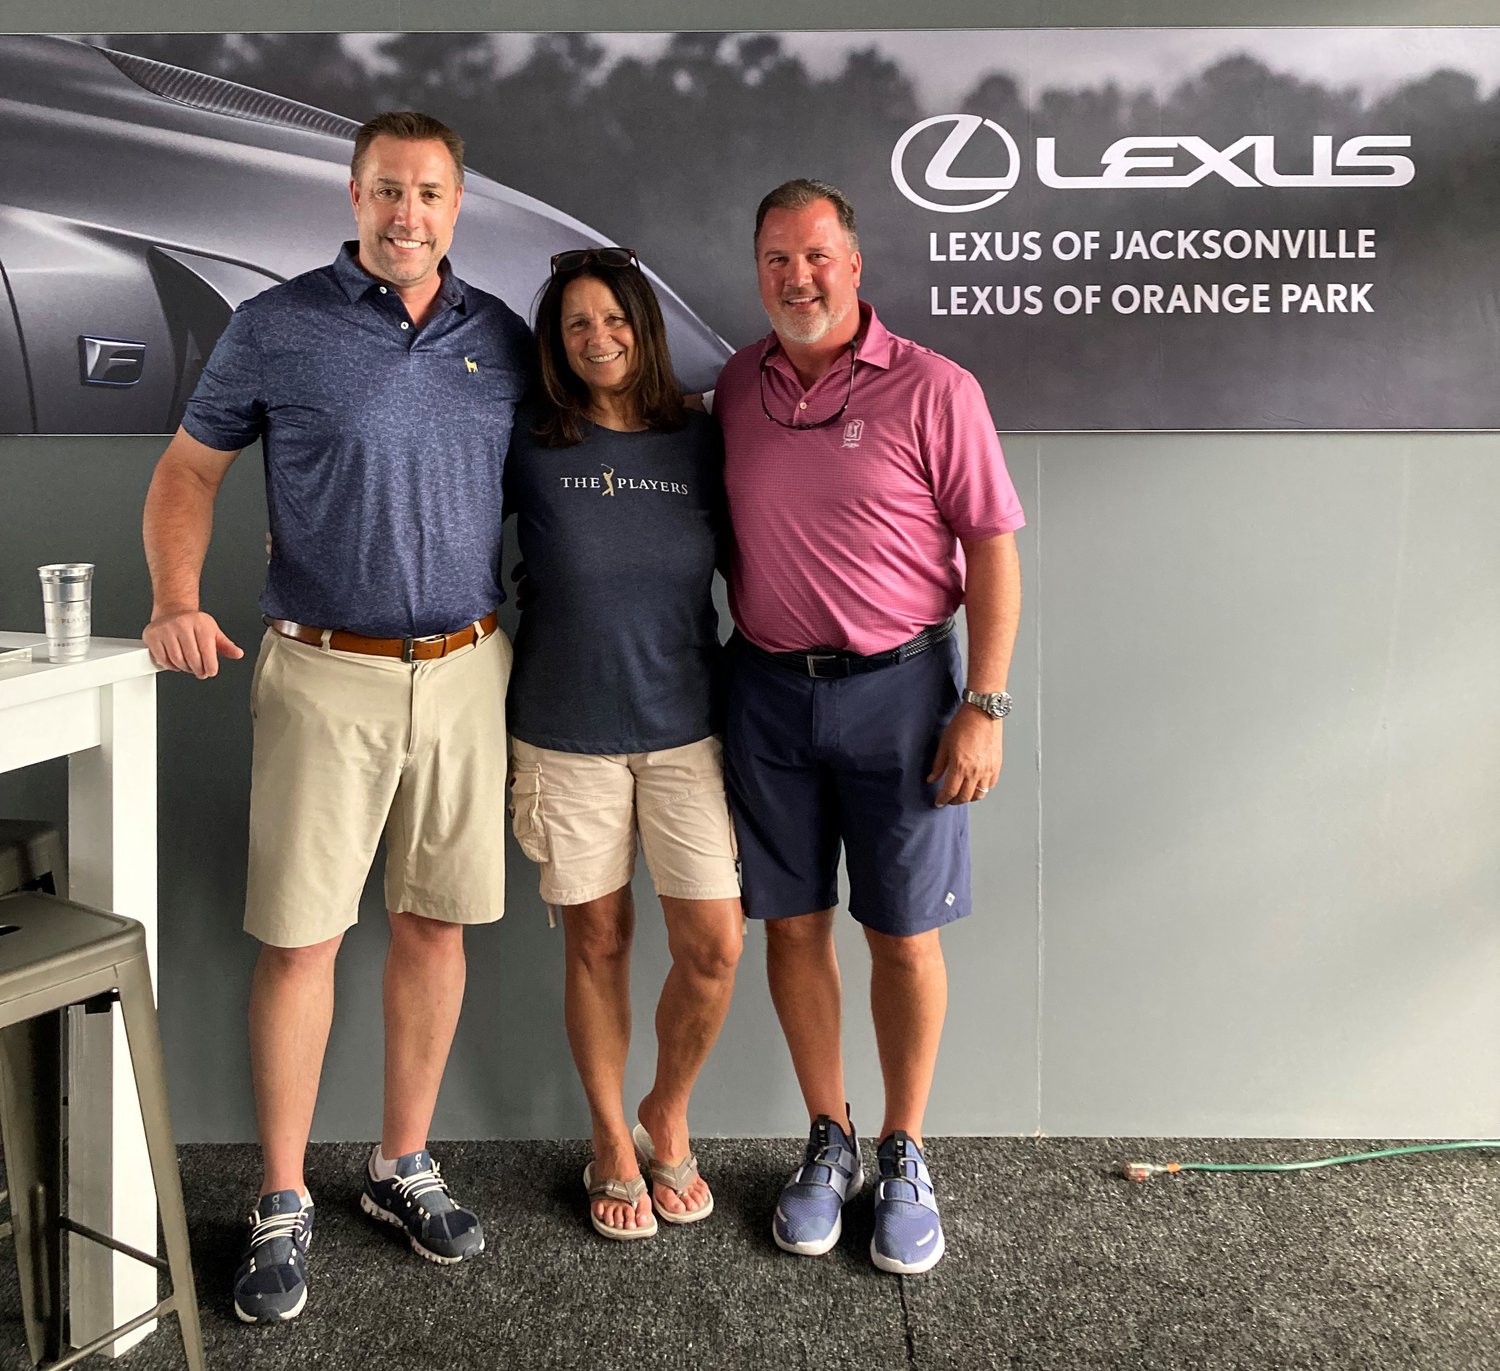 Pictured from left are: Brian Zehren, general manager, Lexus of Jacksonville; Gloria Dongara, AAA Travel;  and Garry Redig, vice president, Fields Automotive Group.